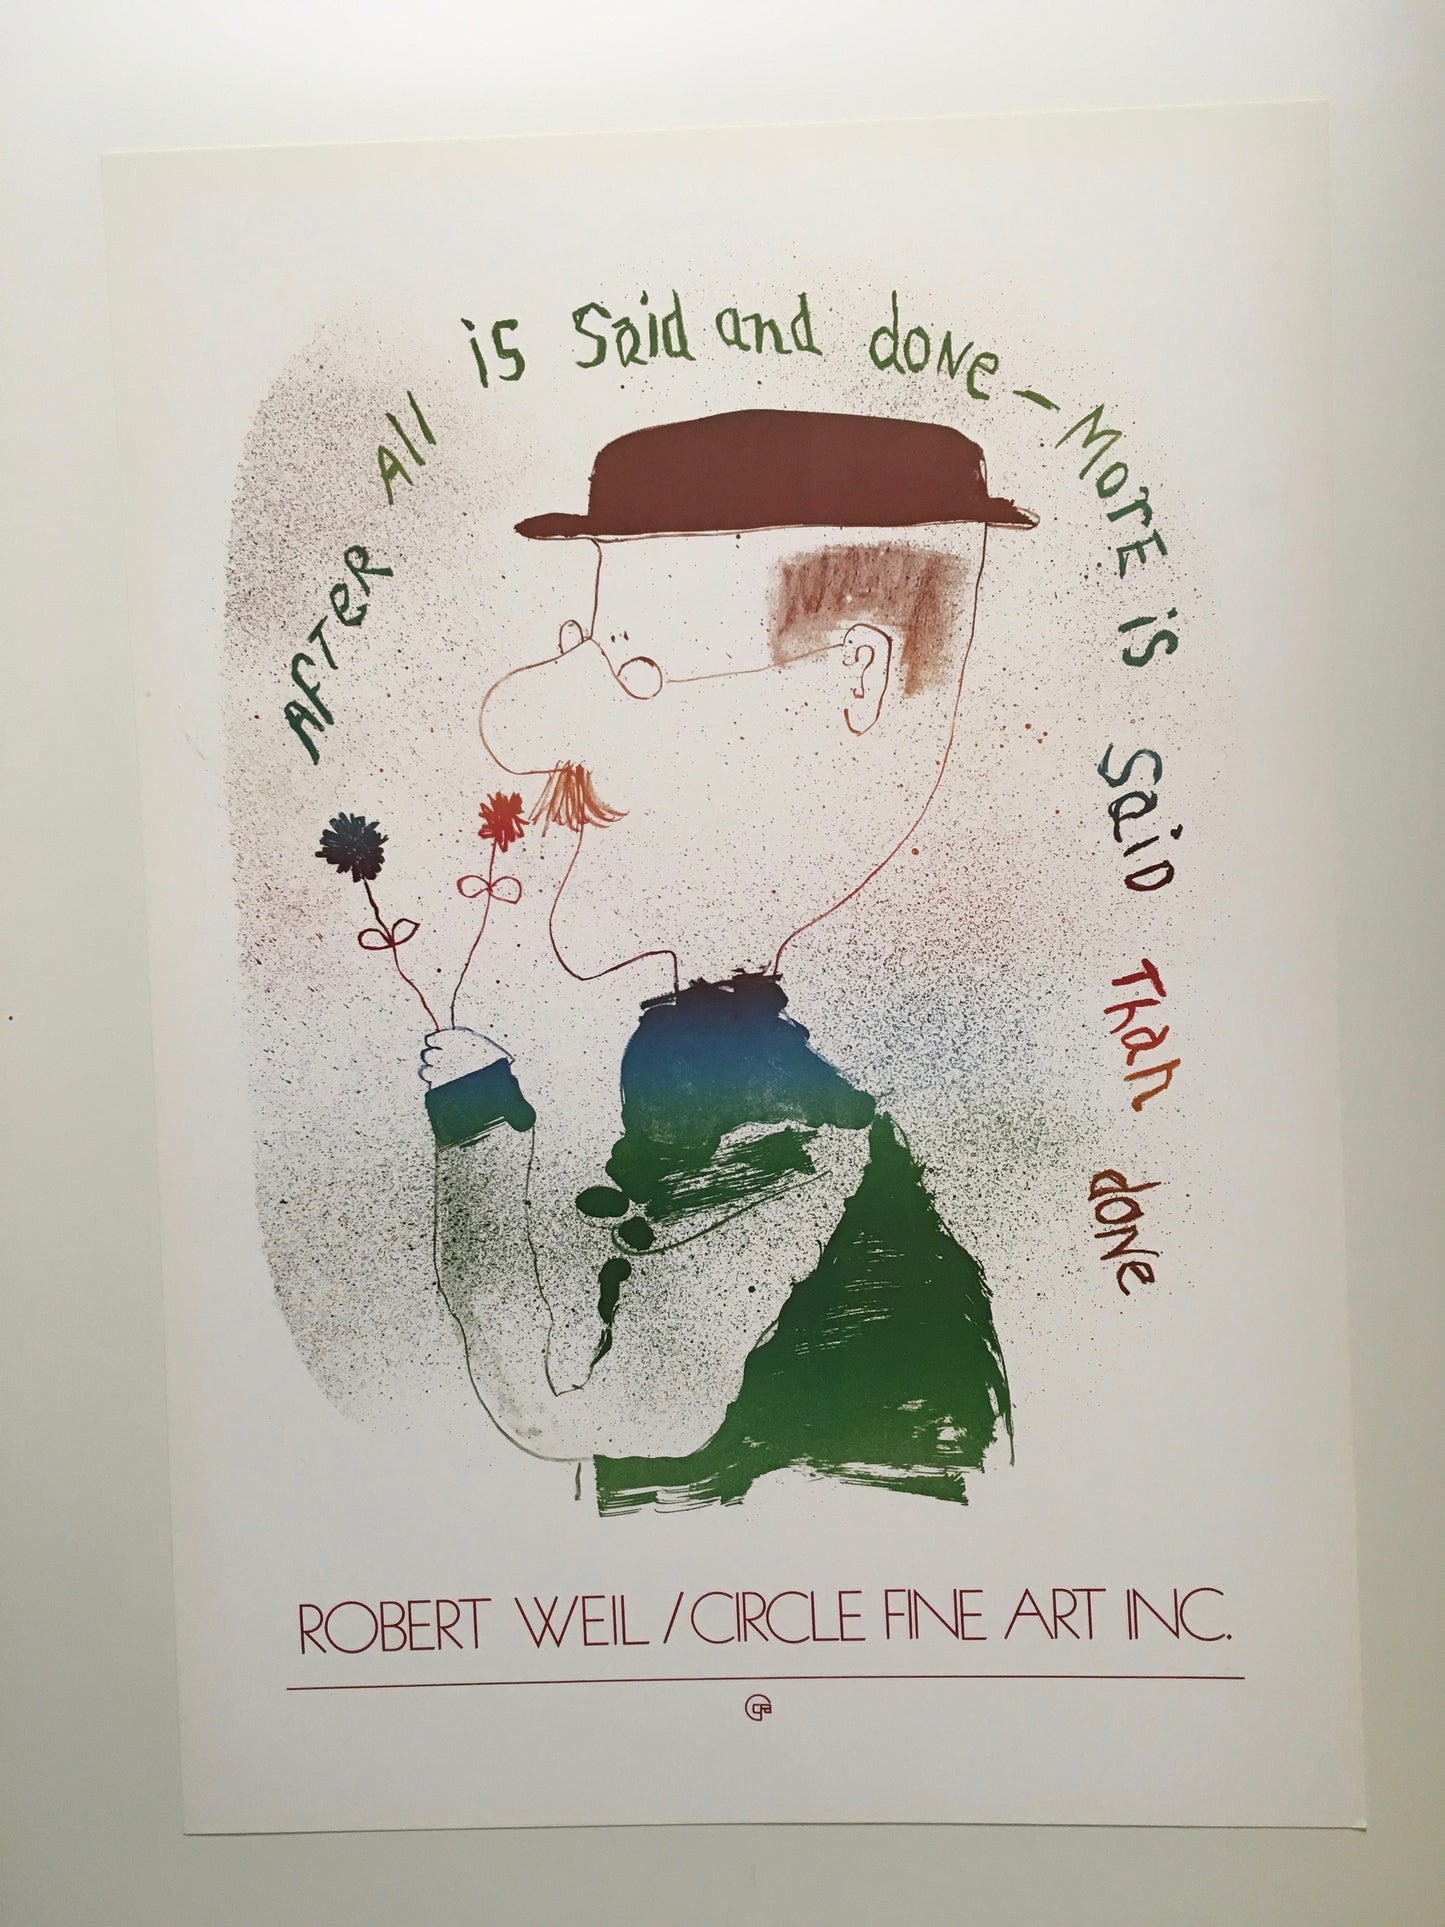 Robert Weil "After All I Said and Done" (19w x 27t)